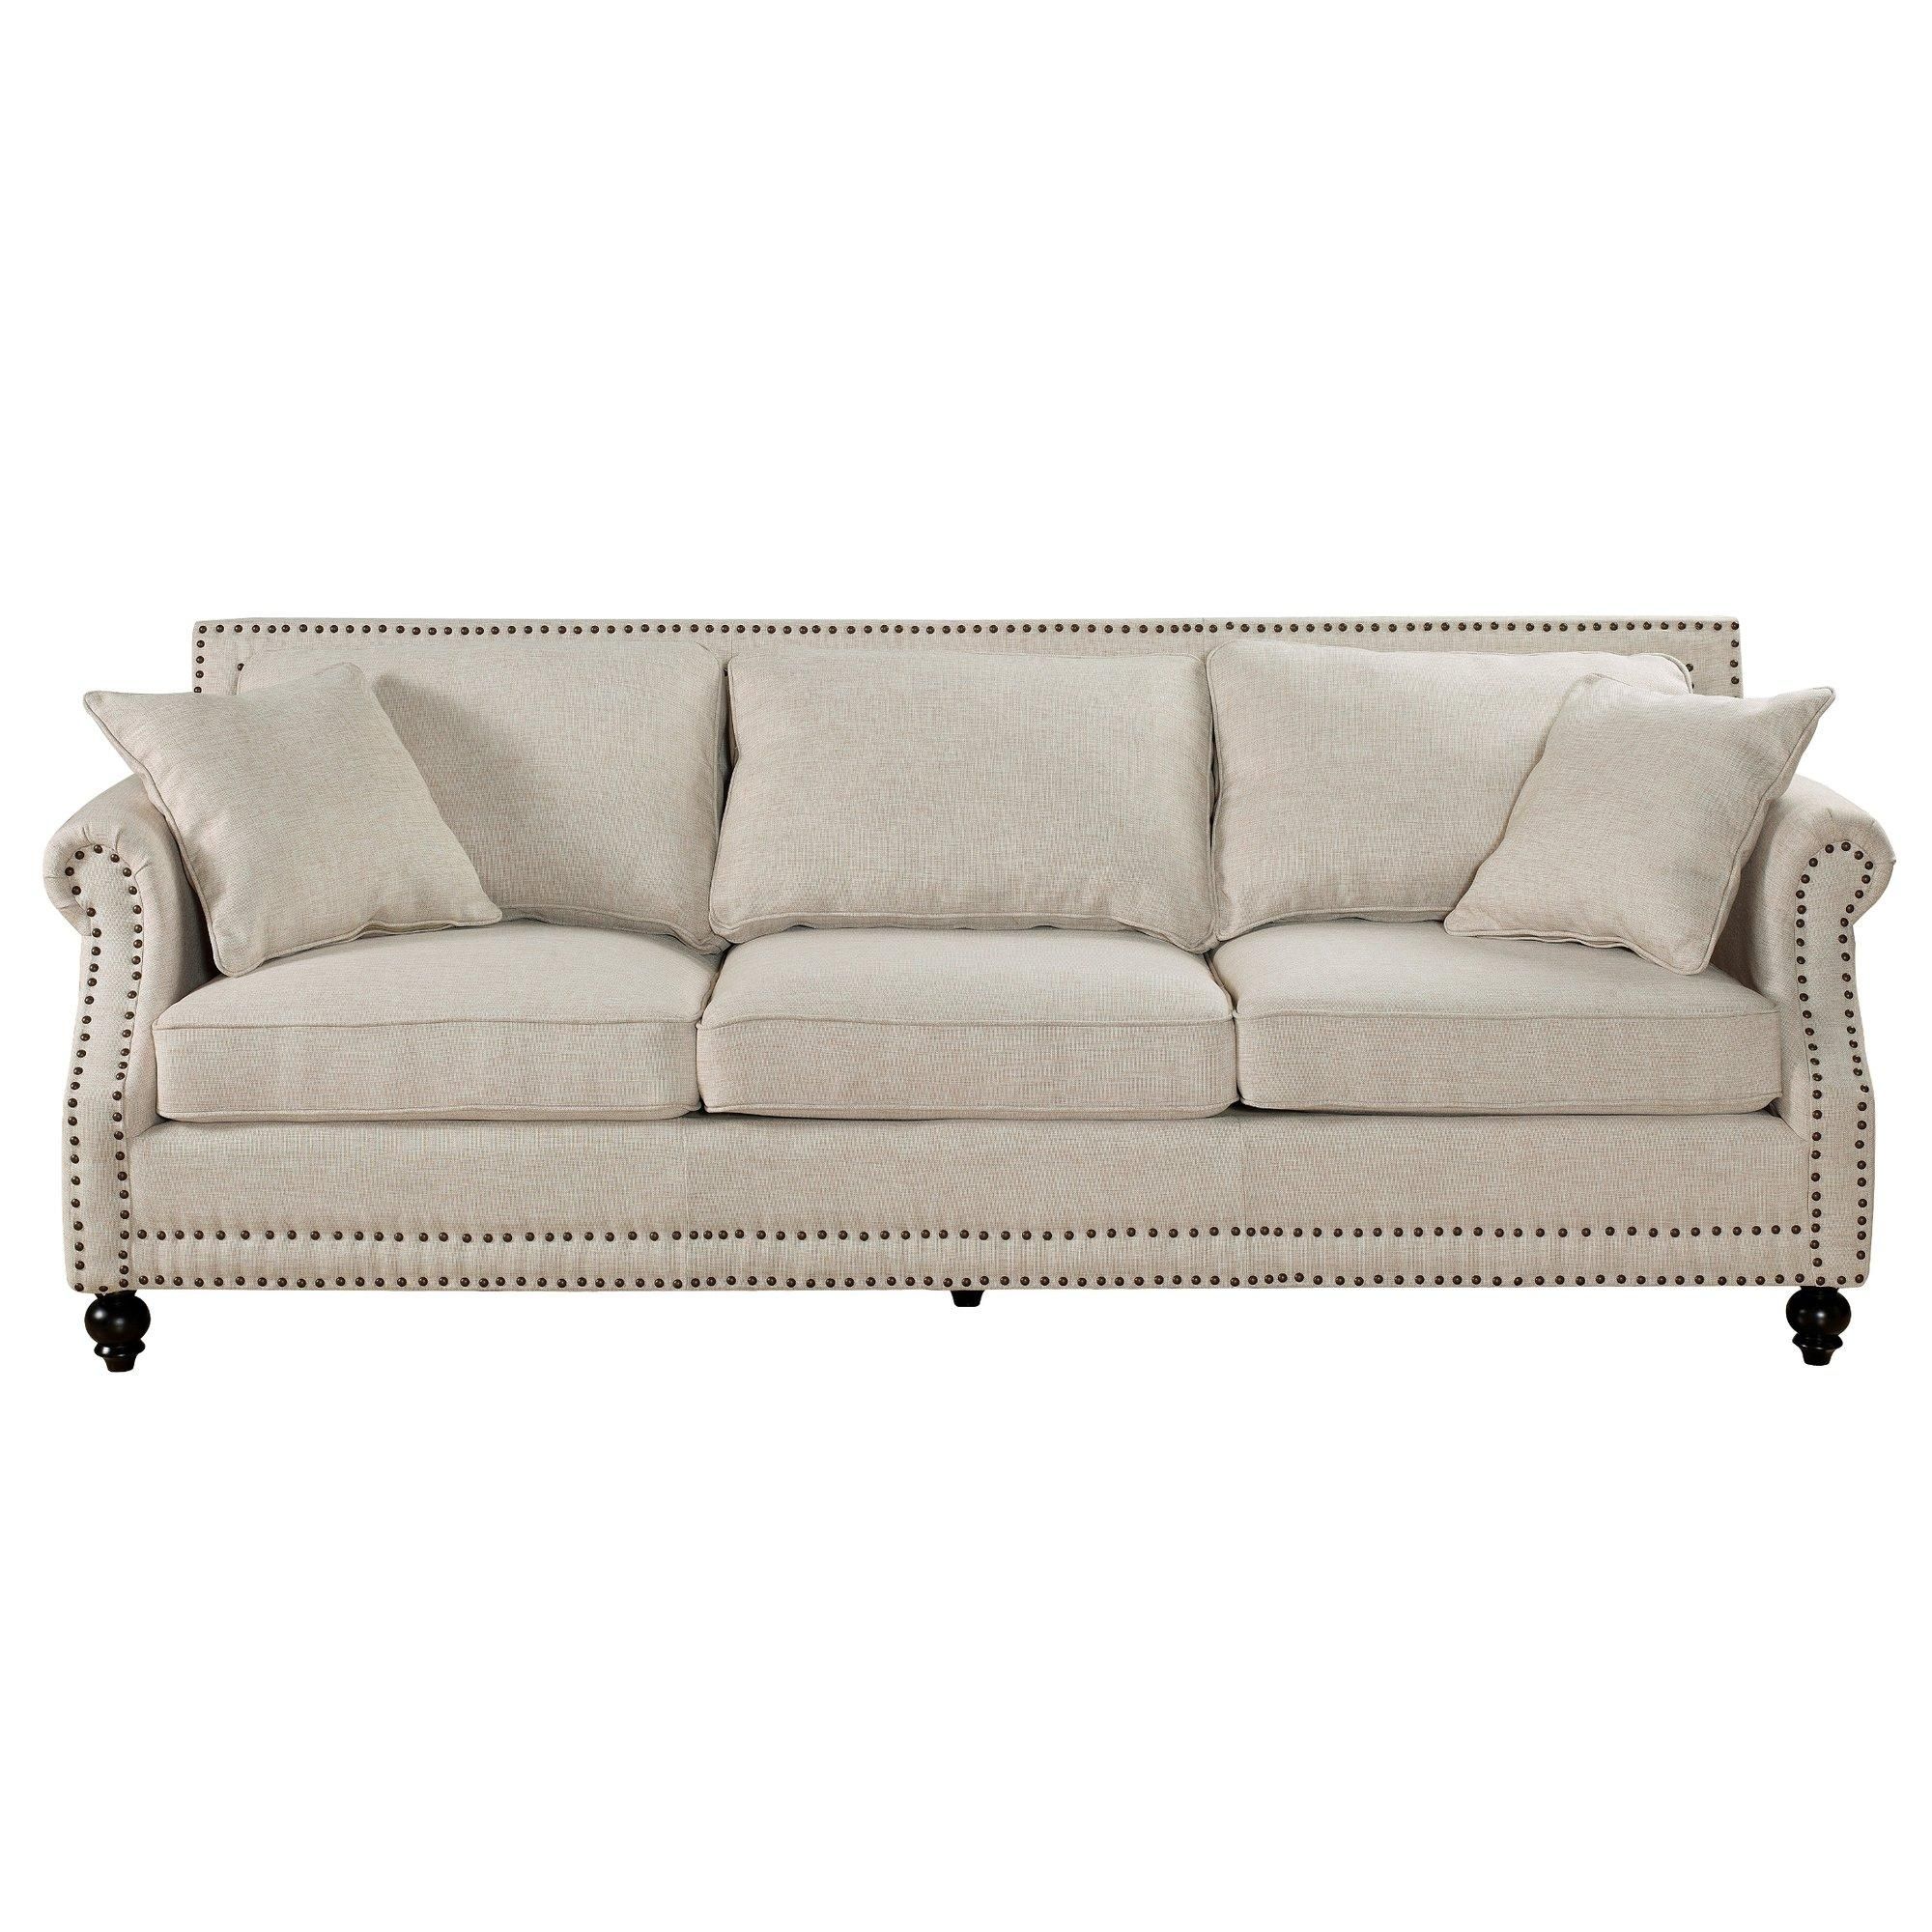 Furniture: Wrap Around Couch | Sears Furniture Outlet | Camden Sofa Intended For Sears Sofa (View 1 of 20)